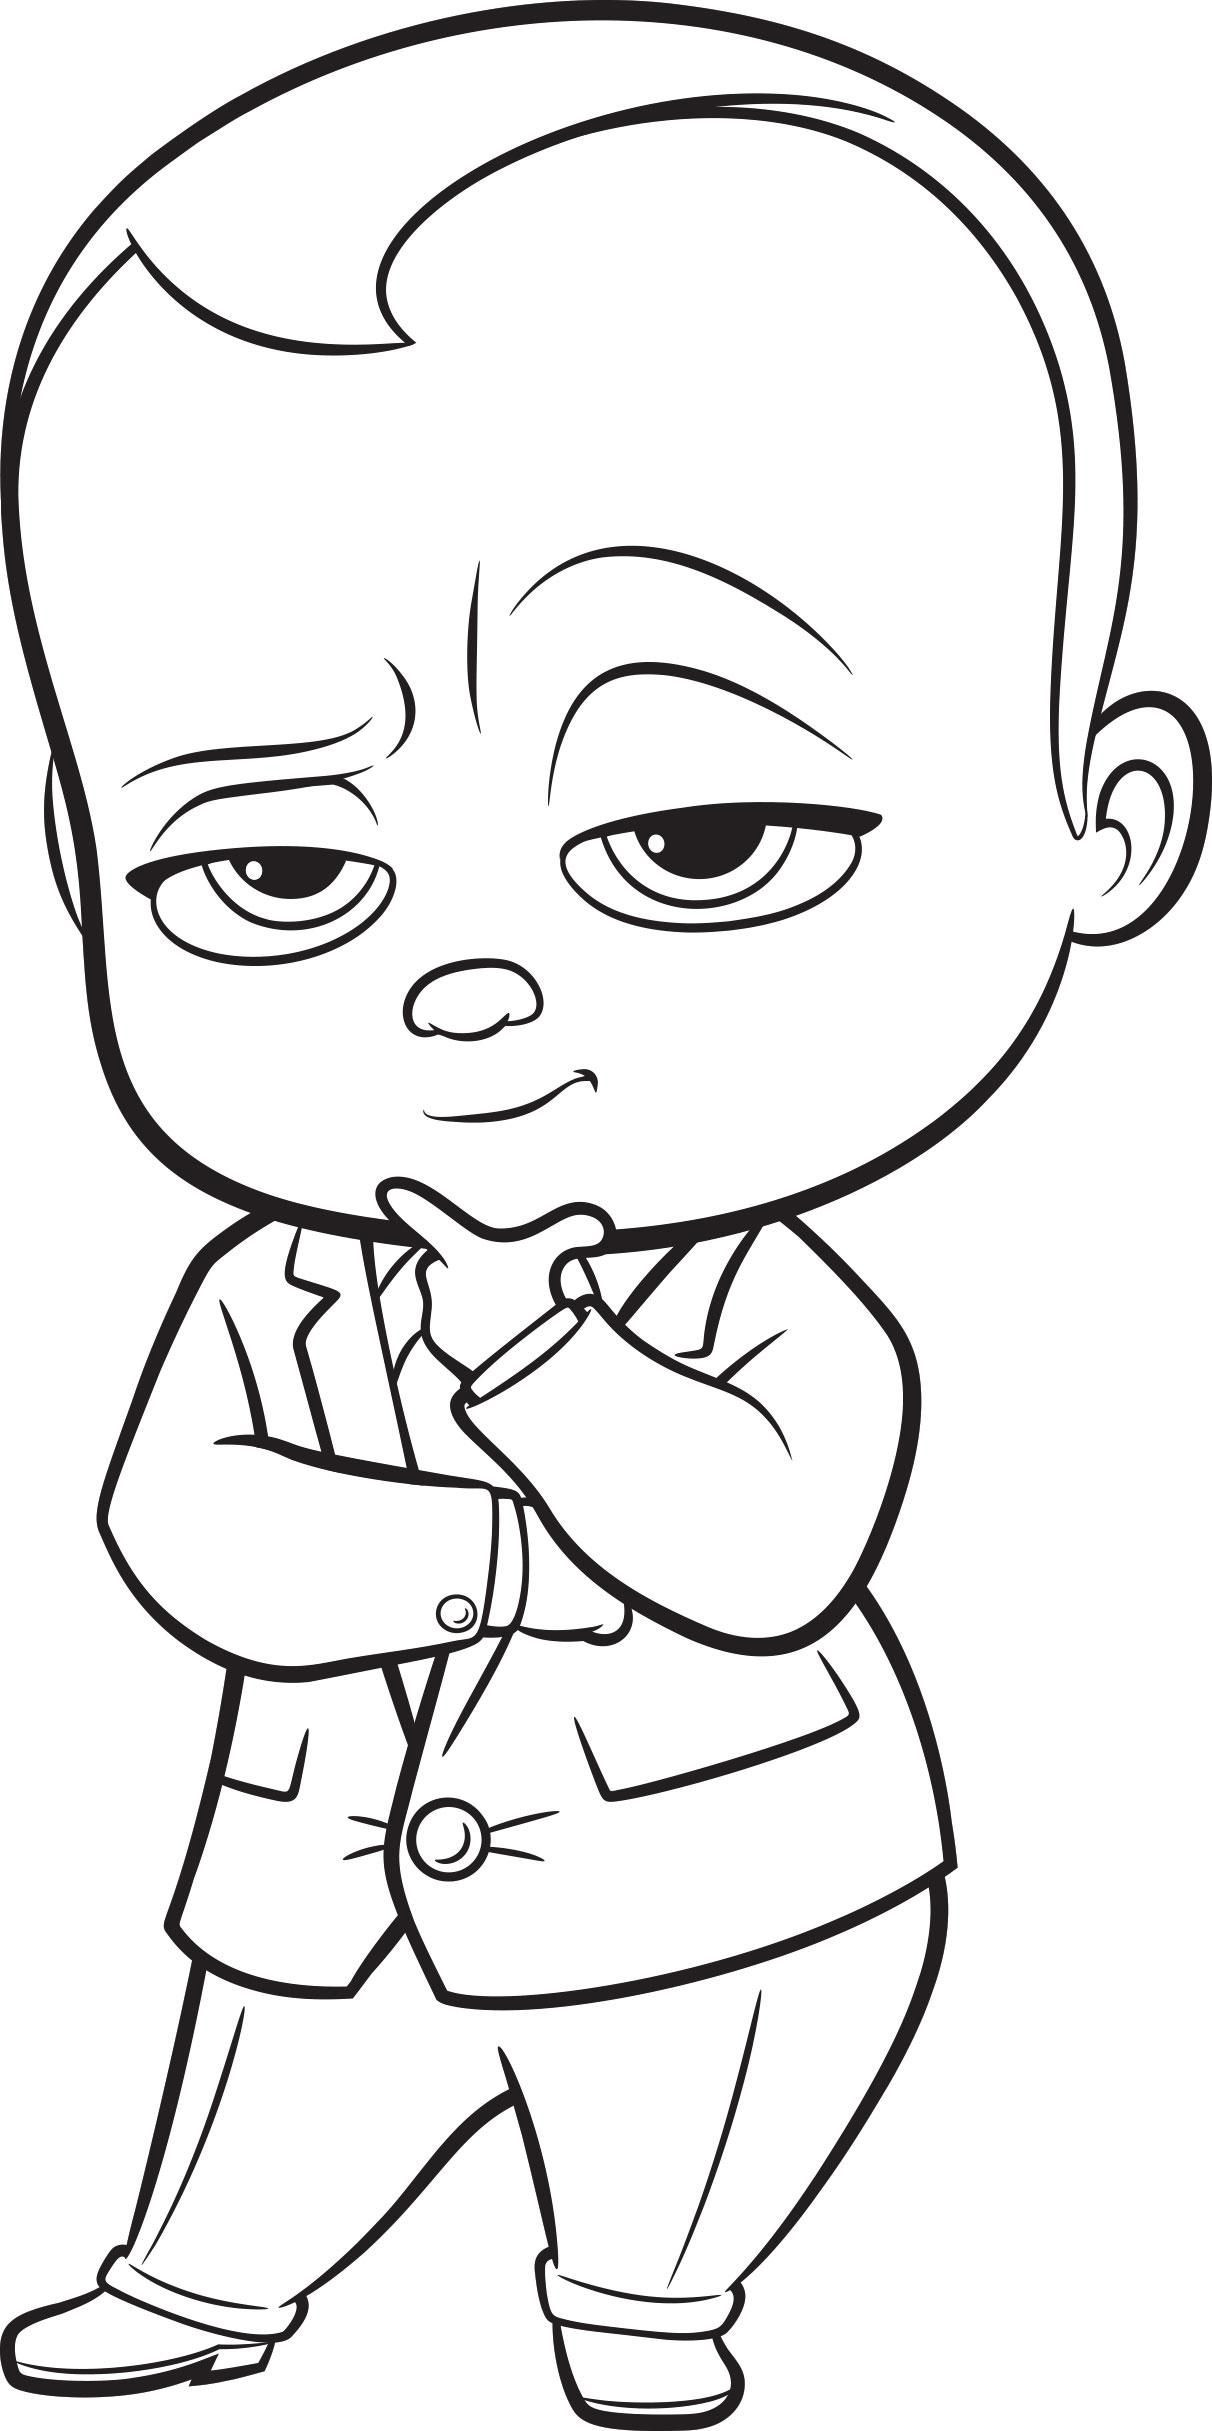 Coloring Pages Baby
 Boss Baby Coloring Pages Best Coloring Pages For Kids